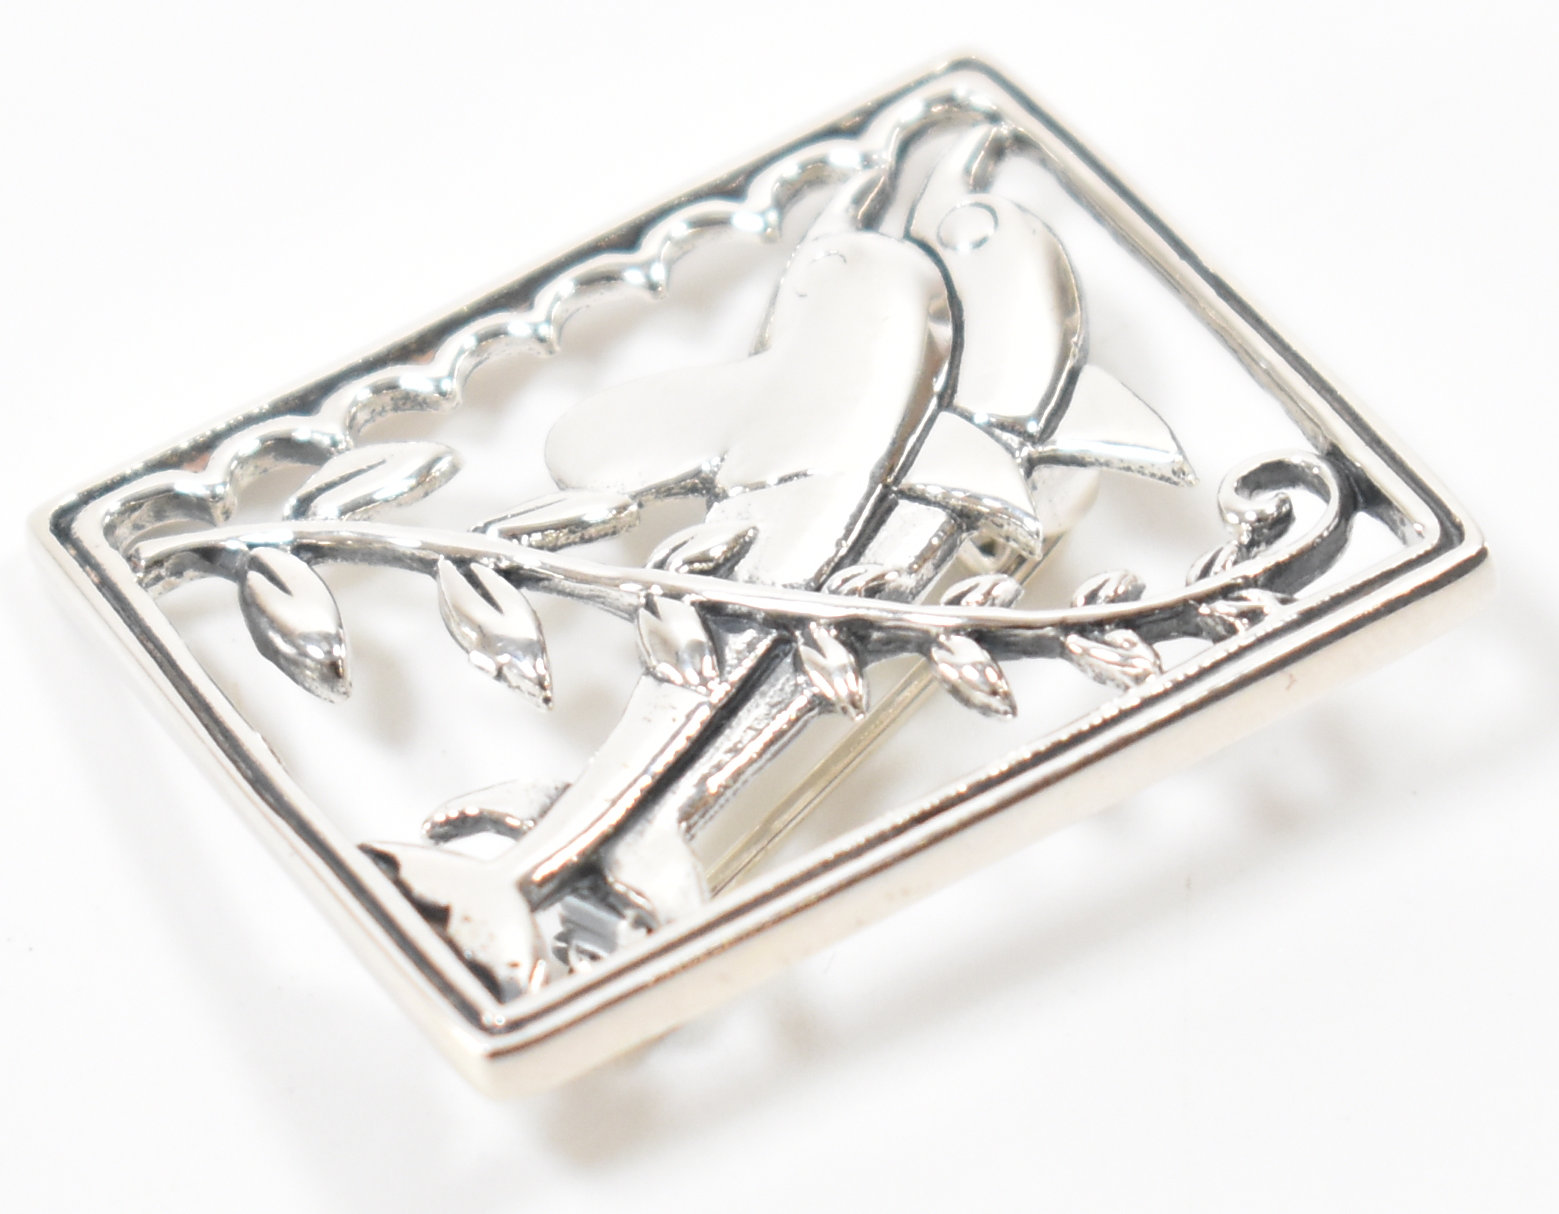 DANISH STYLE SILVER DOLPHIN BROOCH - Image 2 of 4